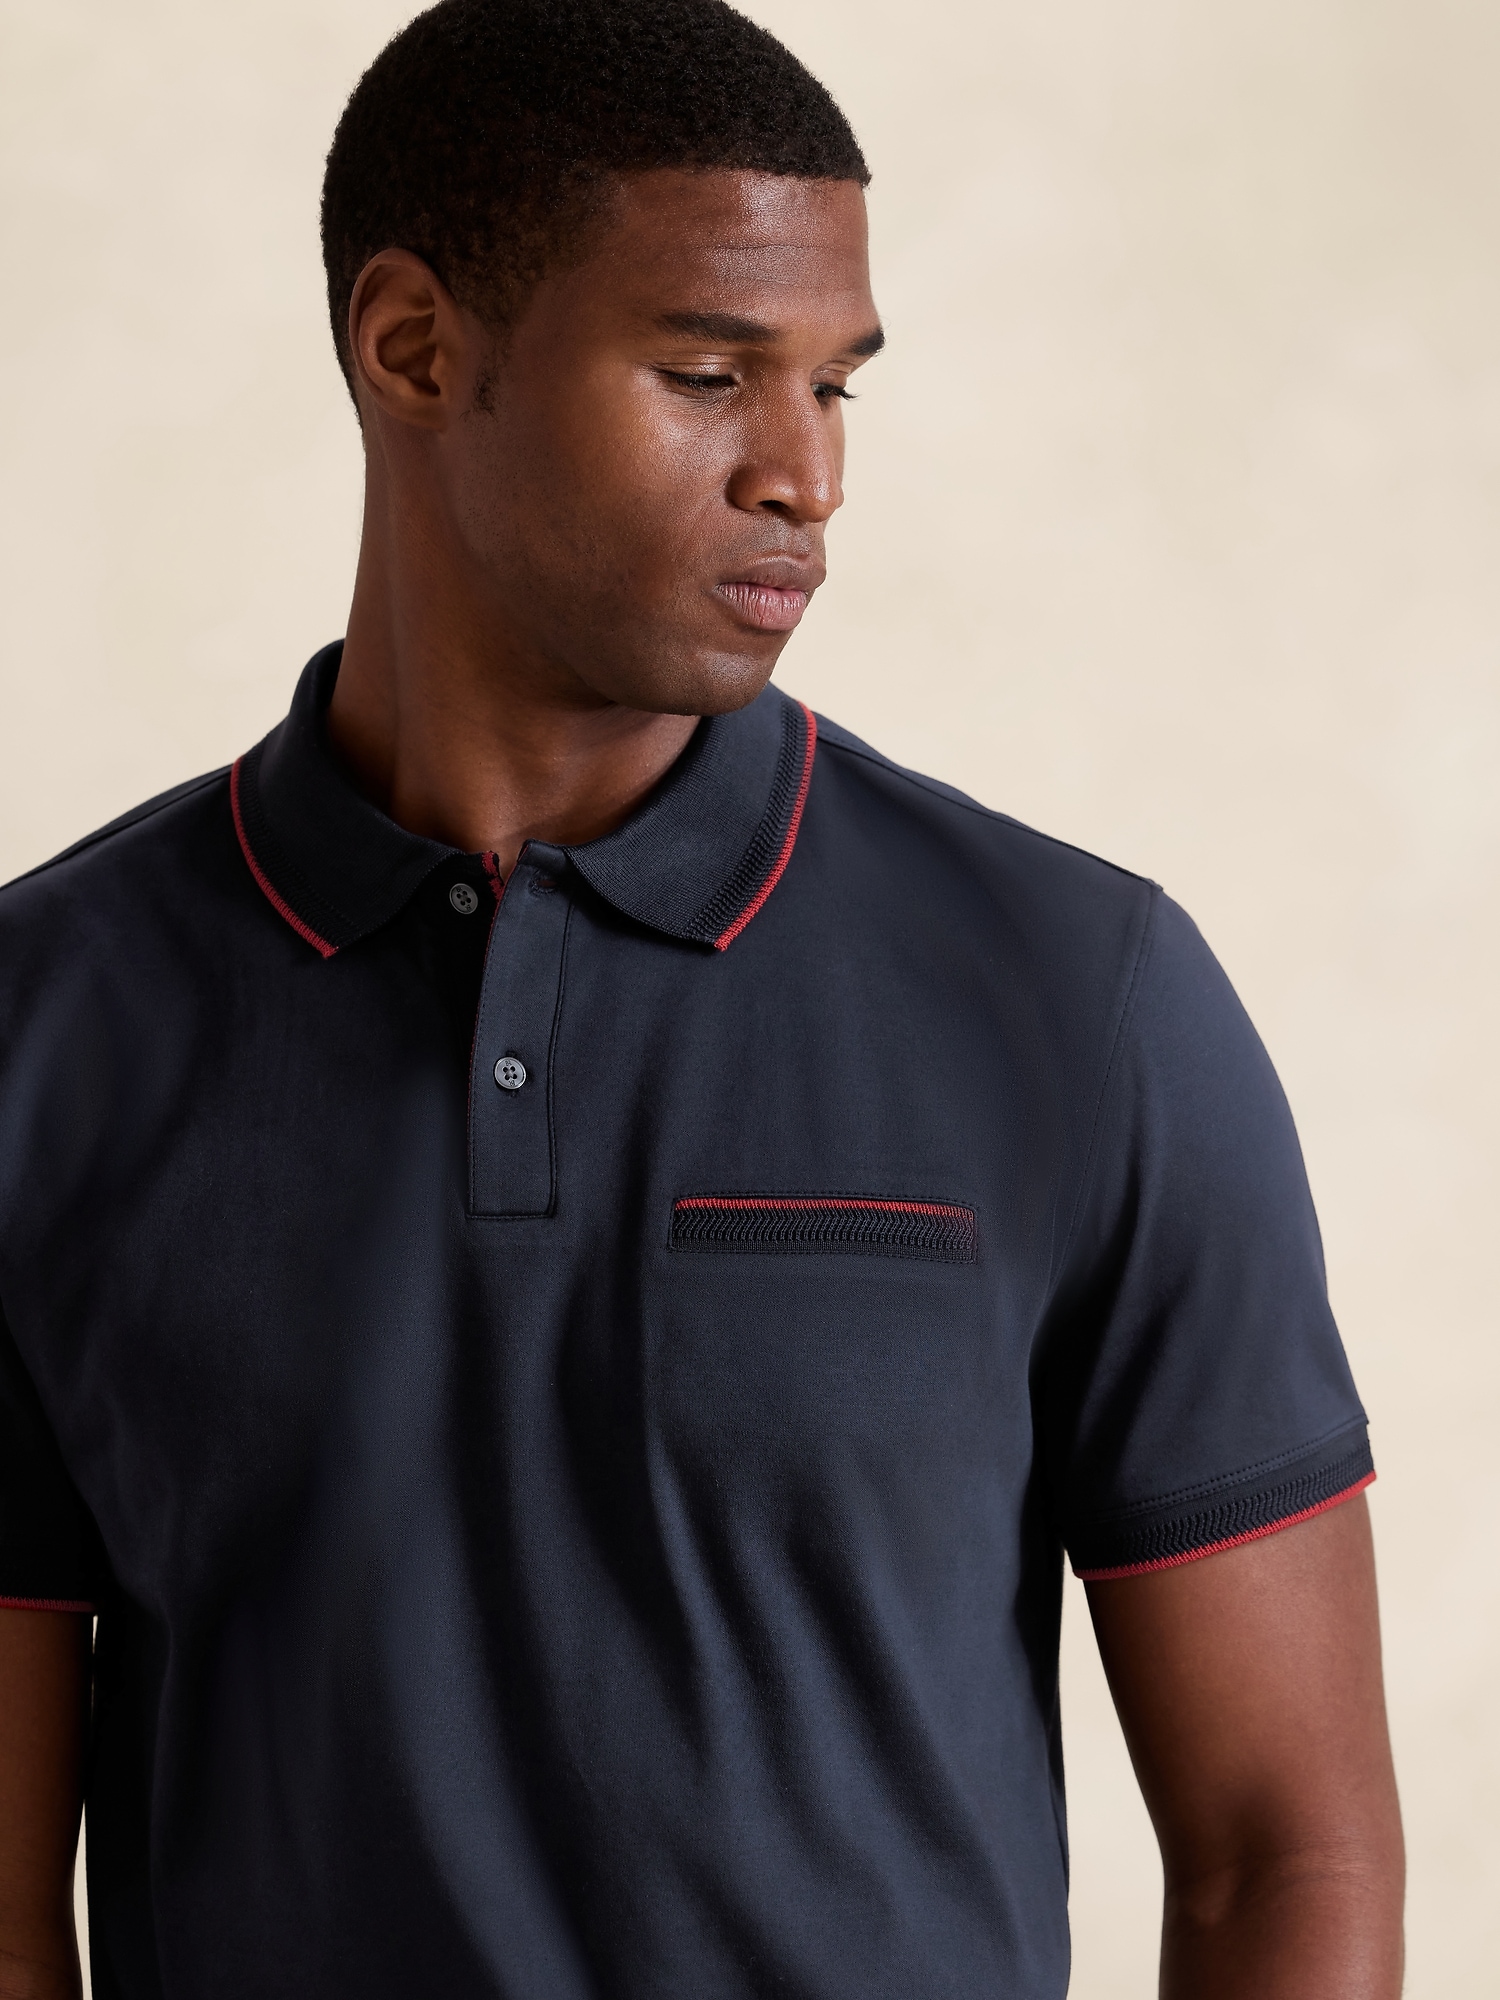 Polished Navy Polo, Luxe Touch Cotton